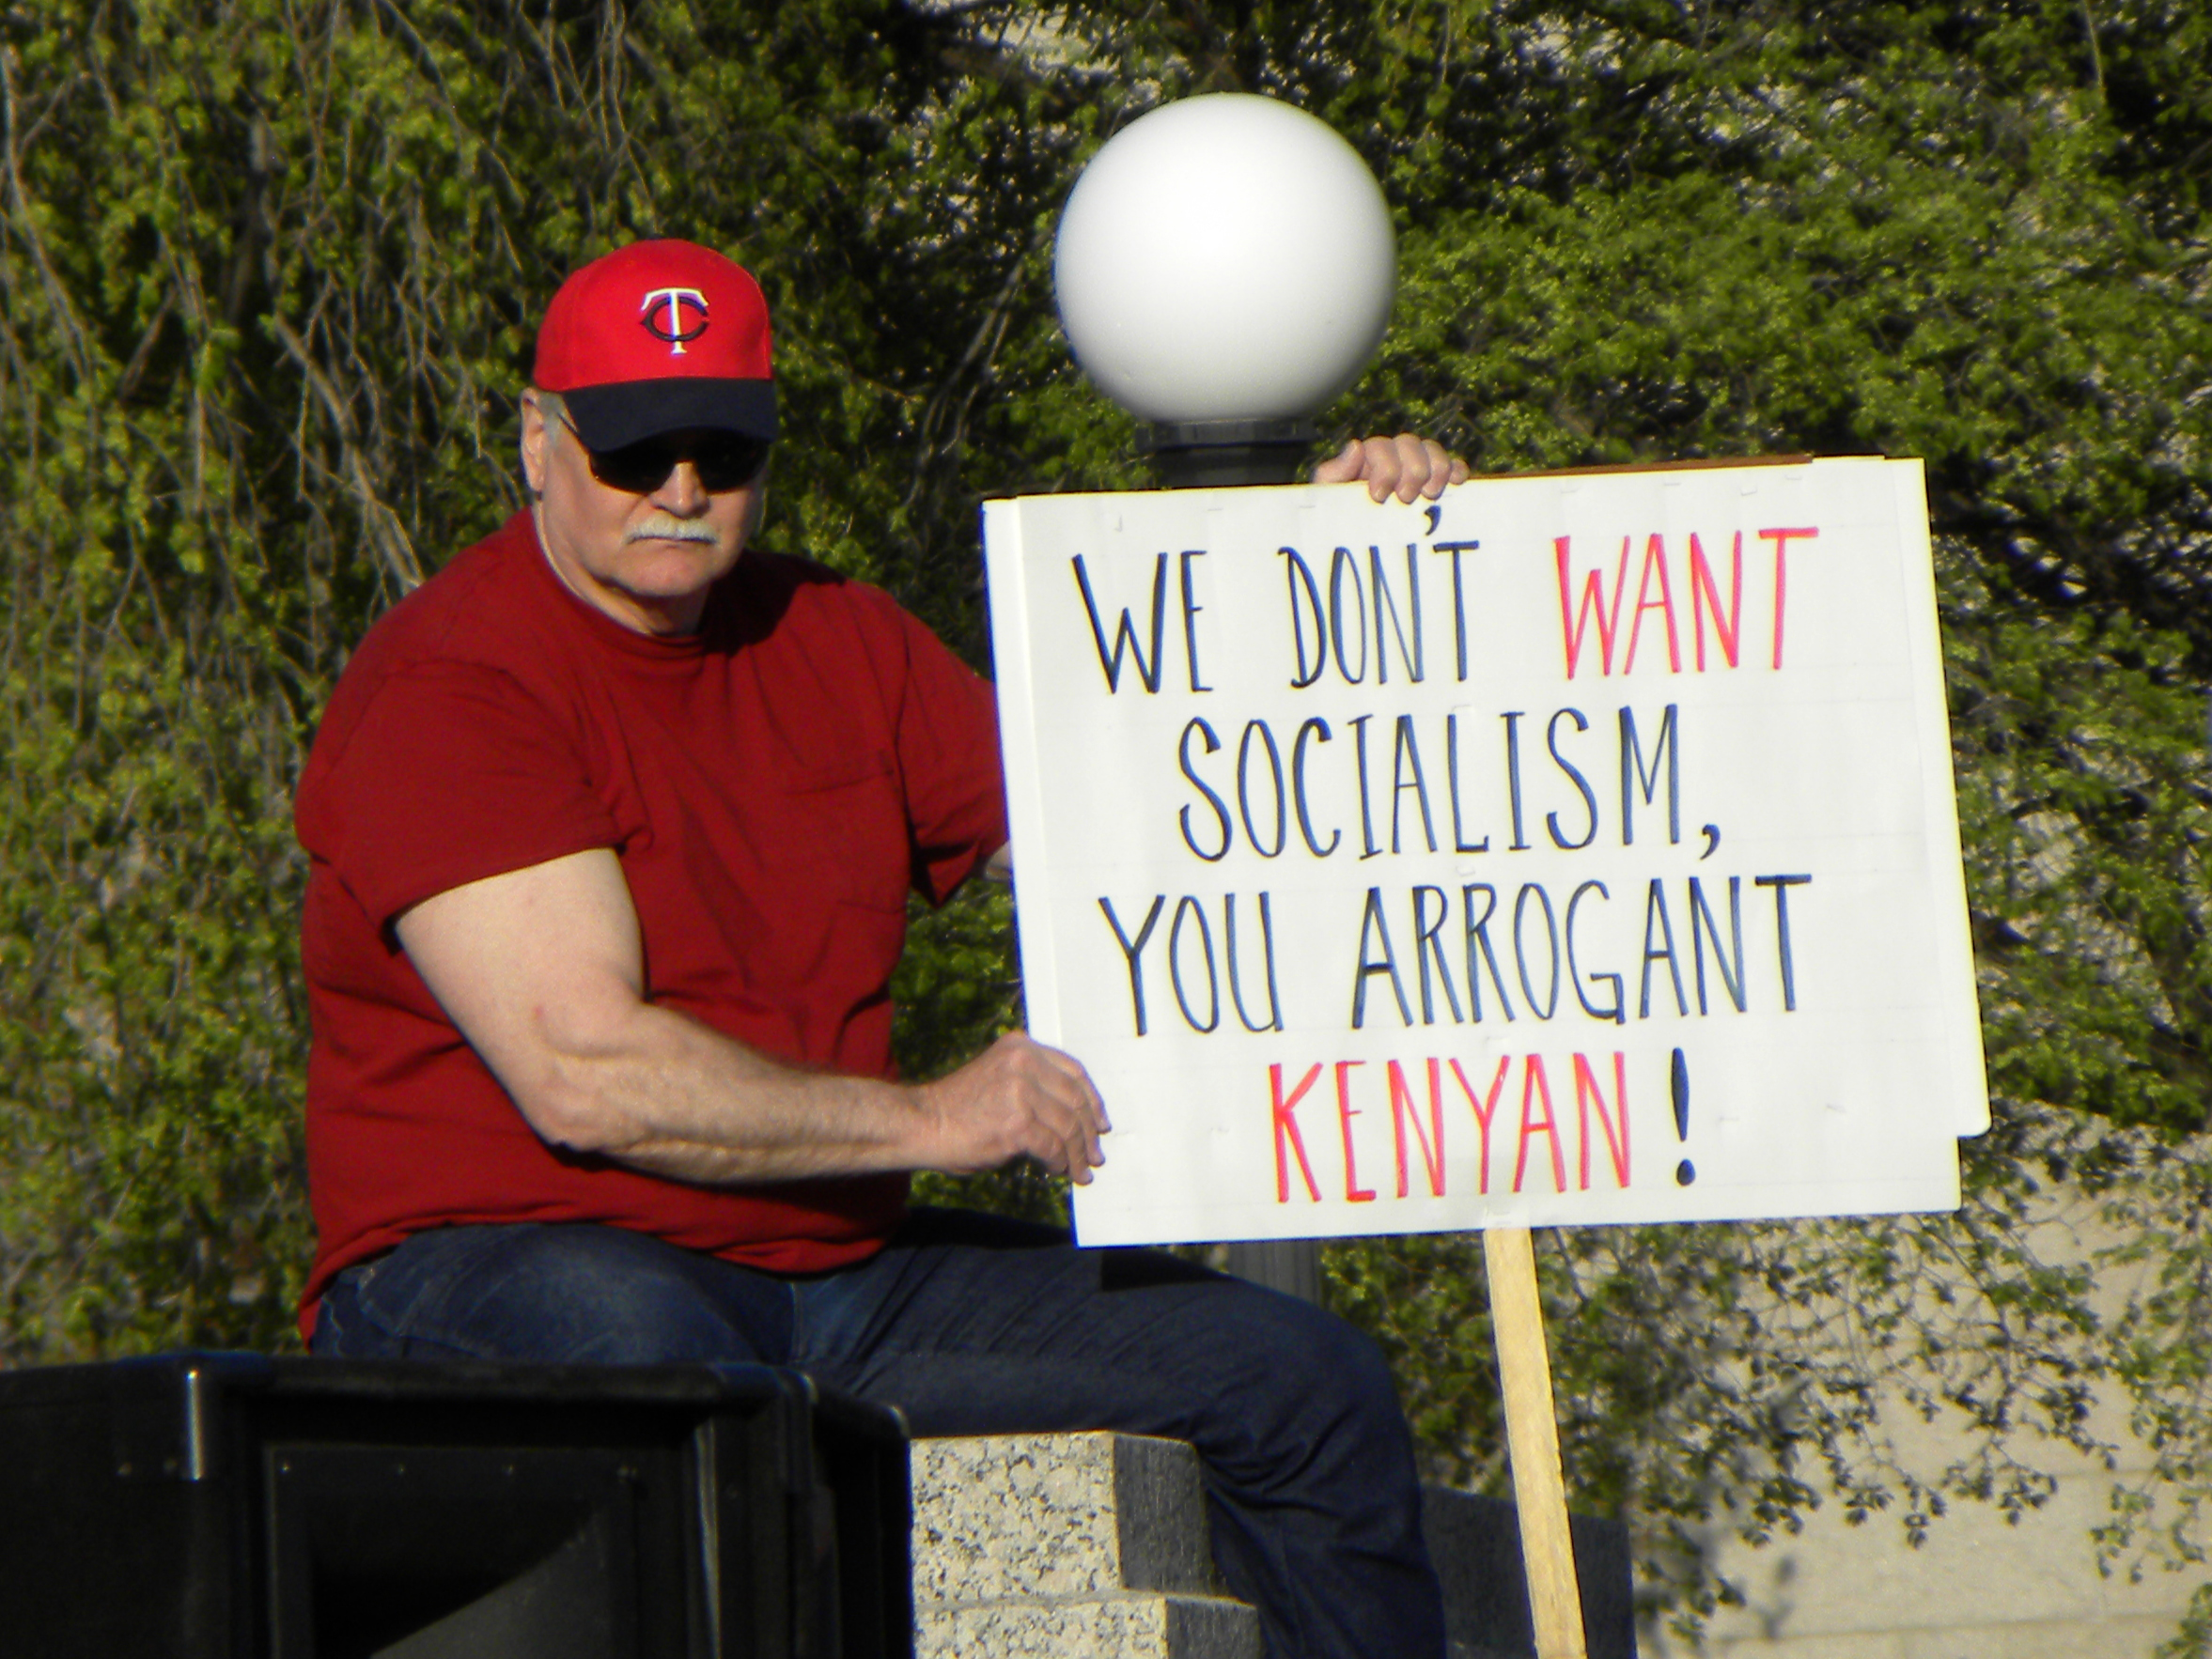 Tea Party protester with sign: ‘We don't WANT socialism, you arrogant KENYAN!’